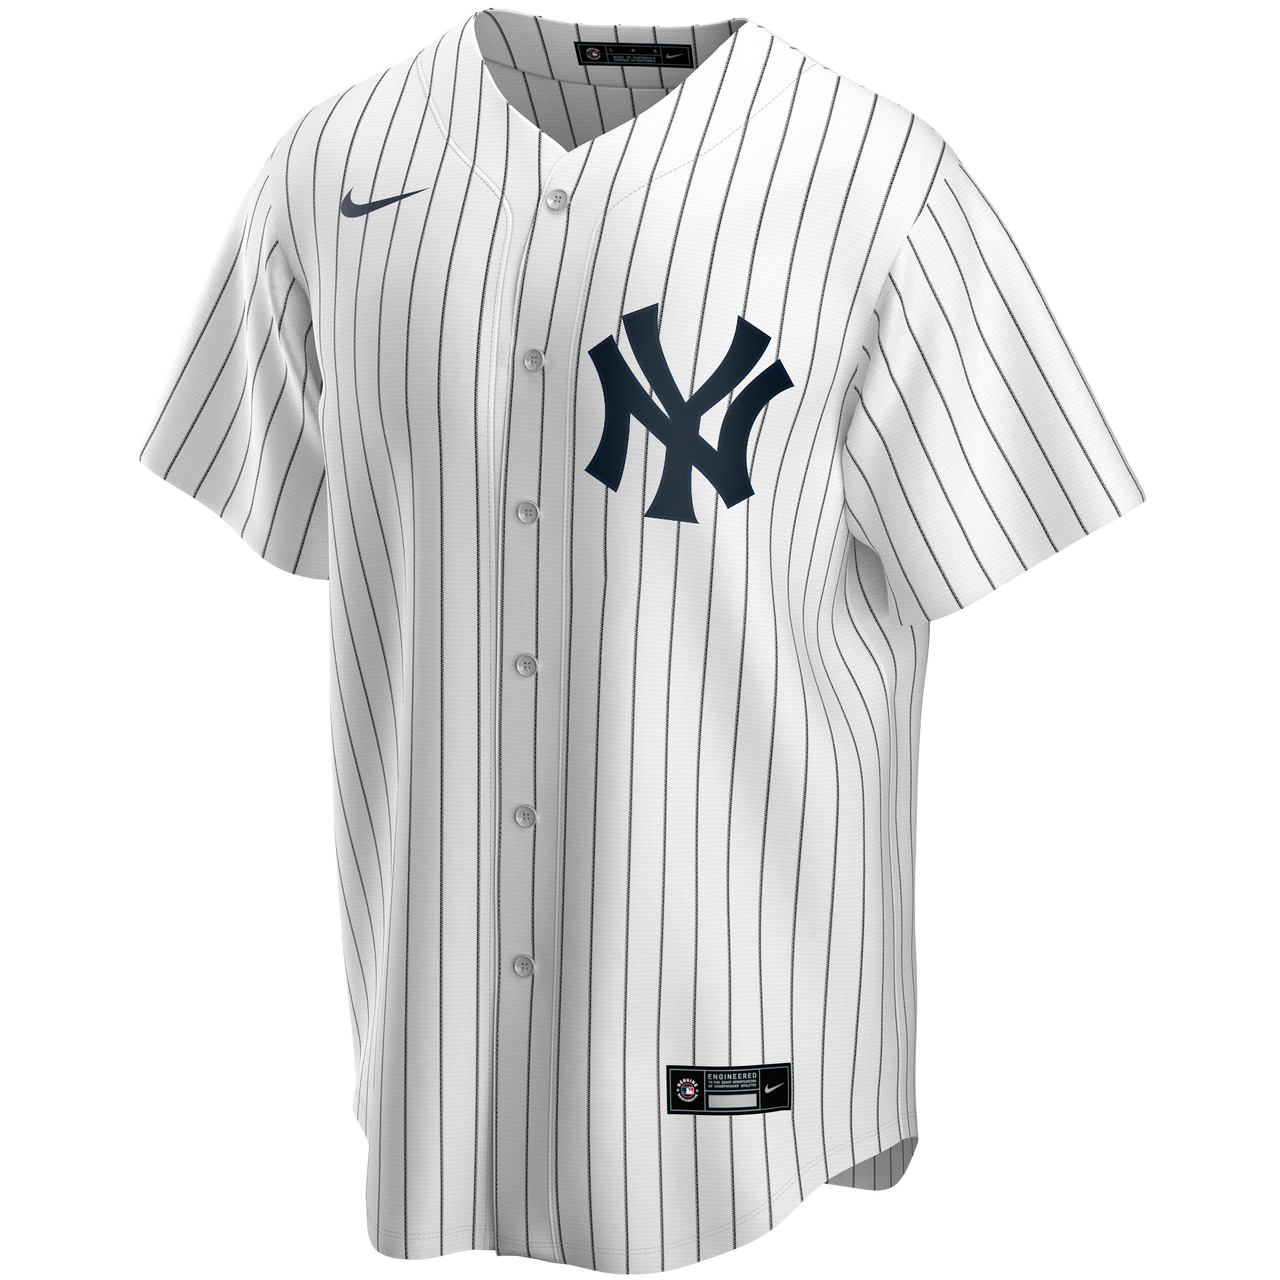 Yankees Toddler/Child Shirt (Personalization Available)